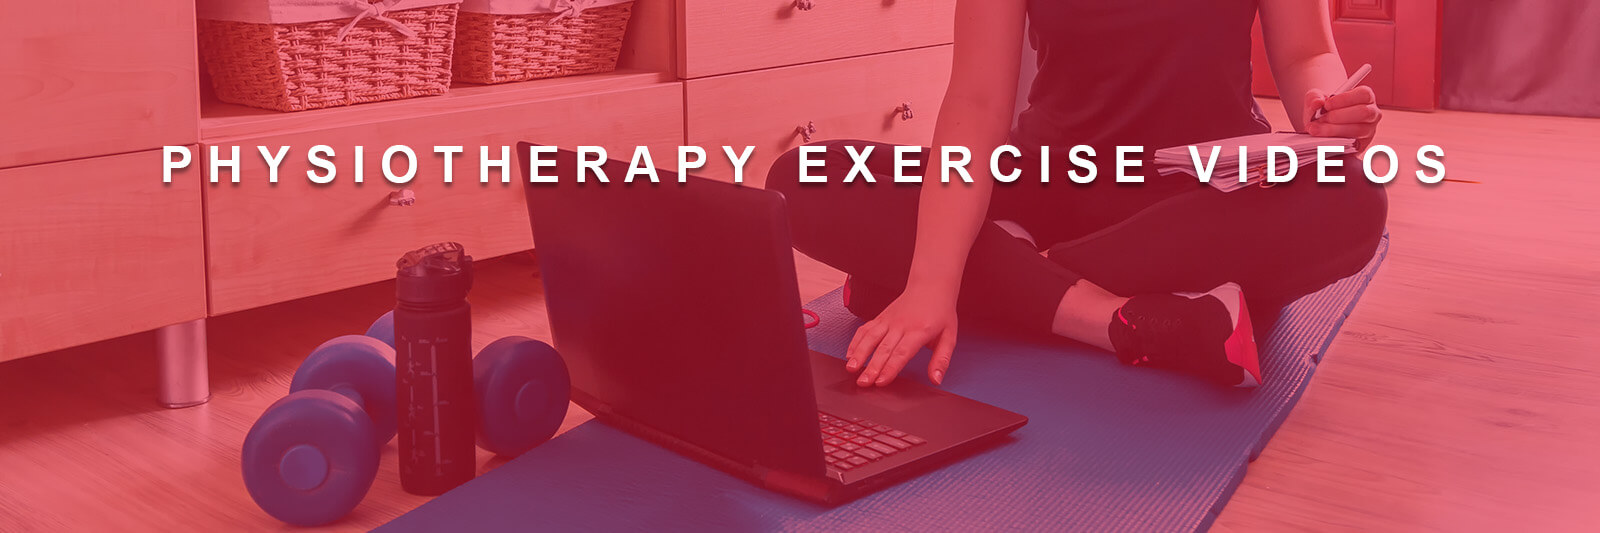 Physiotherapy Exercise Videos